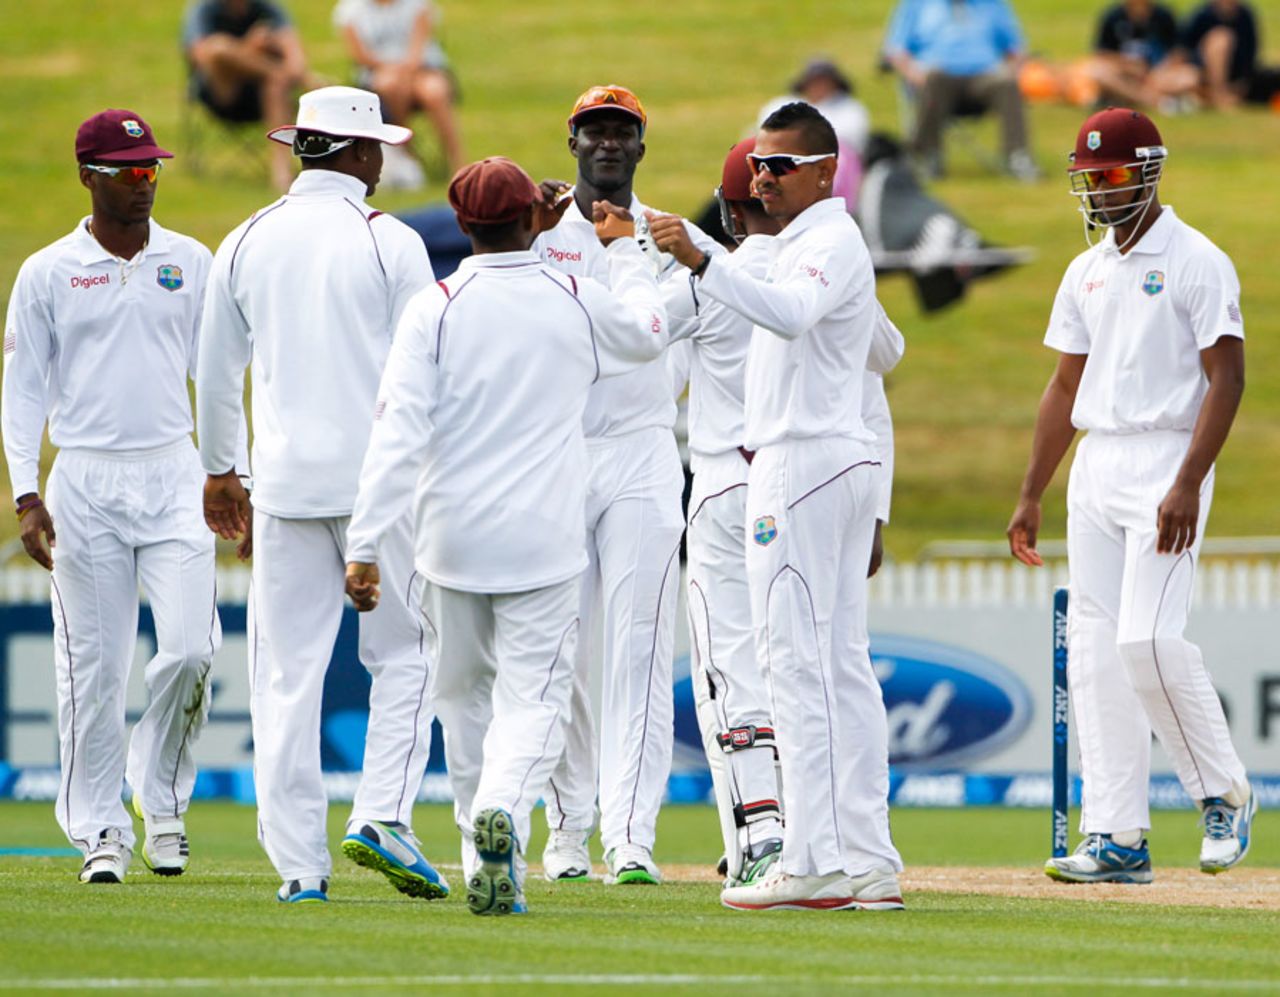 Sunil Narine makes an early breakthrough on the third day, New Zealand v West Indies, 3rd Test, Hamilton, 3rd day, December 21, 2013